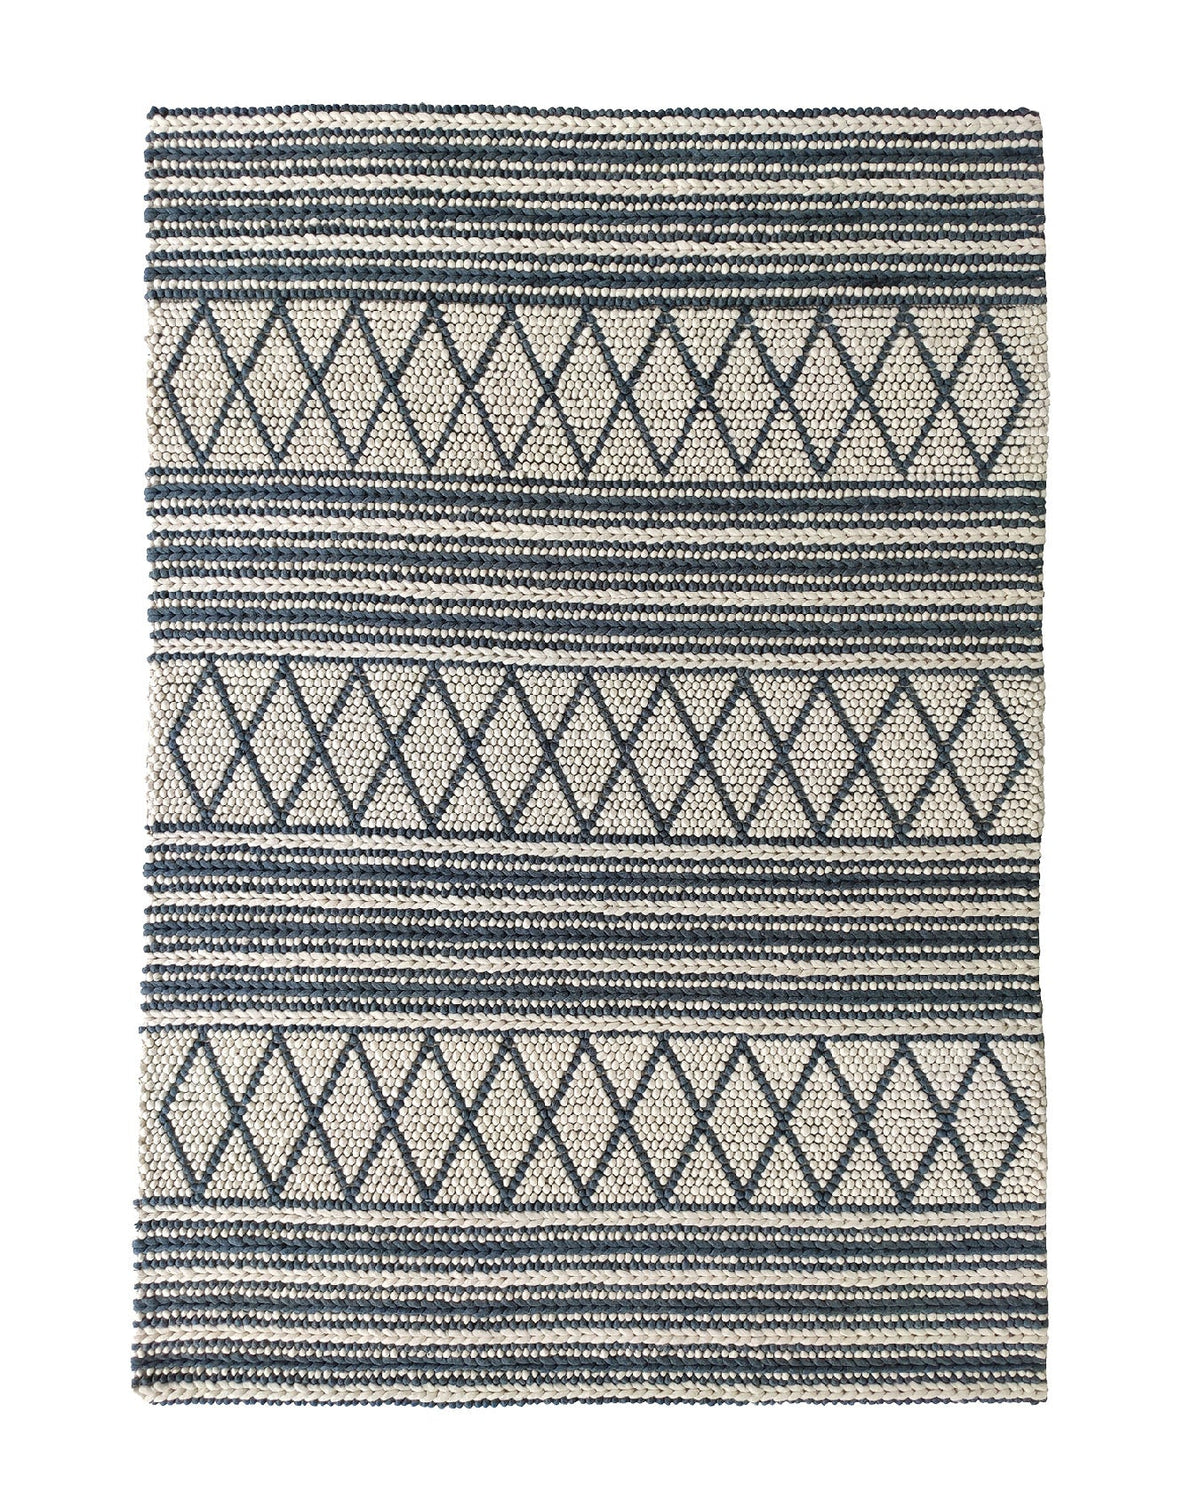 Hand Made Modern Living Room Woven Rug Black & Natural Color (2 Sizes)